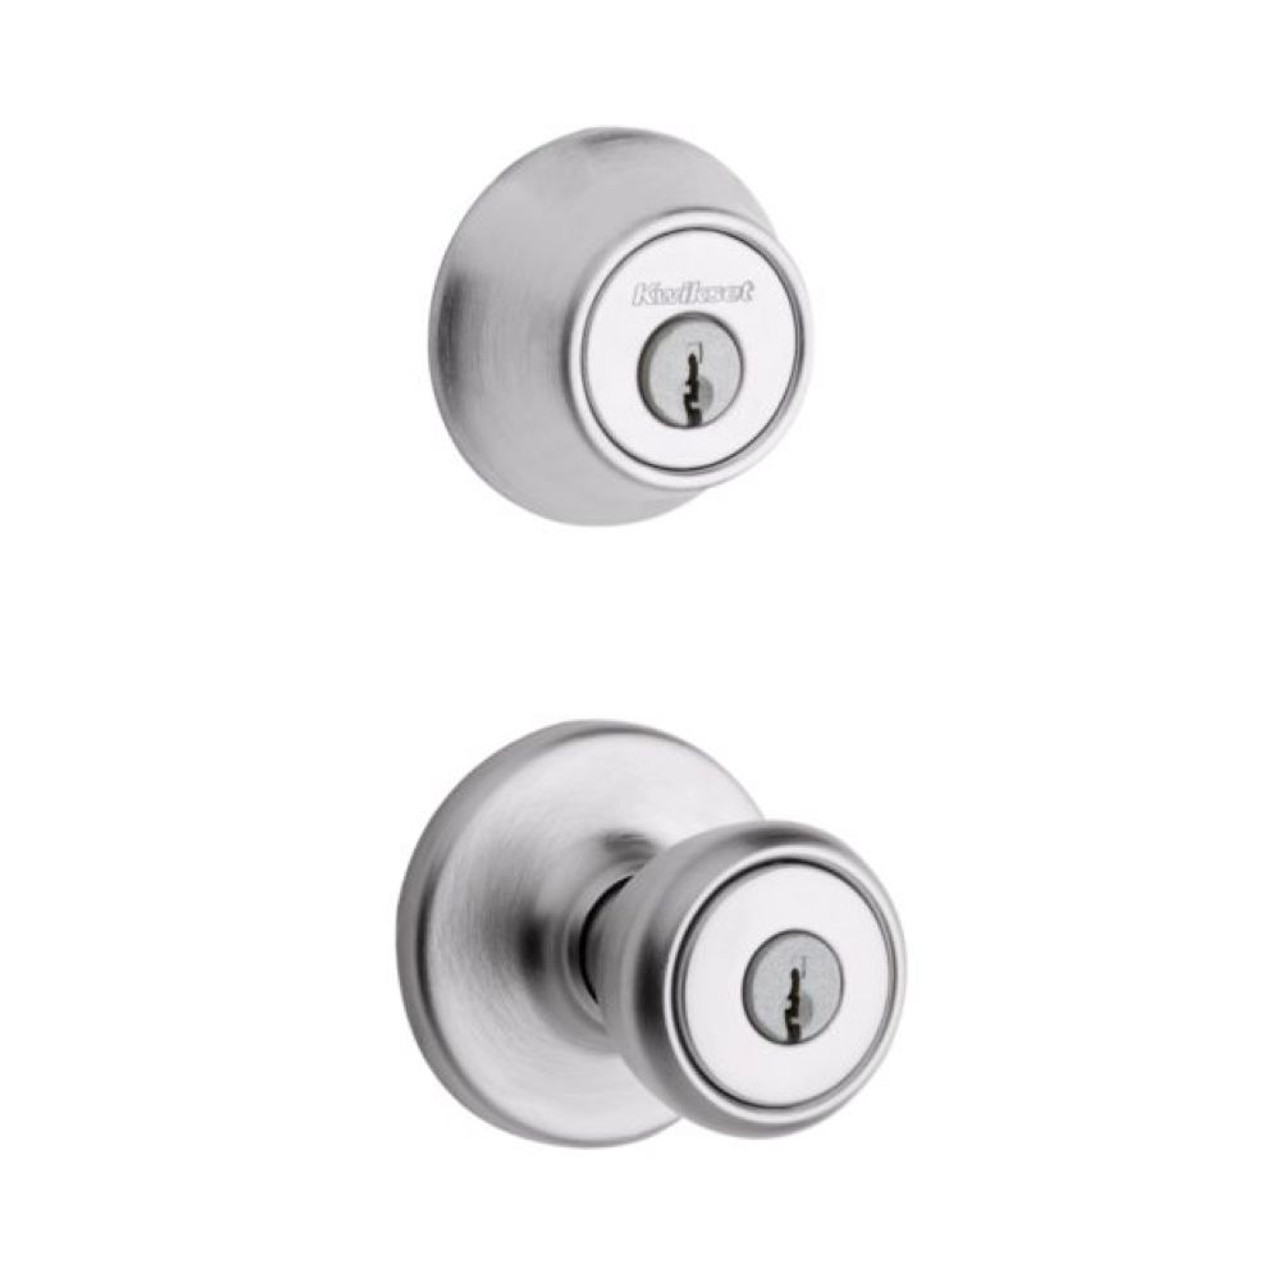 Juno Satin Nickel Exterior Entry Door Knob and Double Cylinder Deadbolt  Combo Pack Featuring SmartKey Security